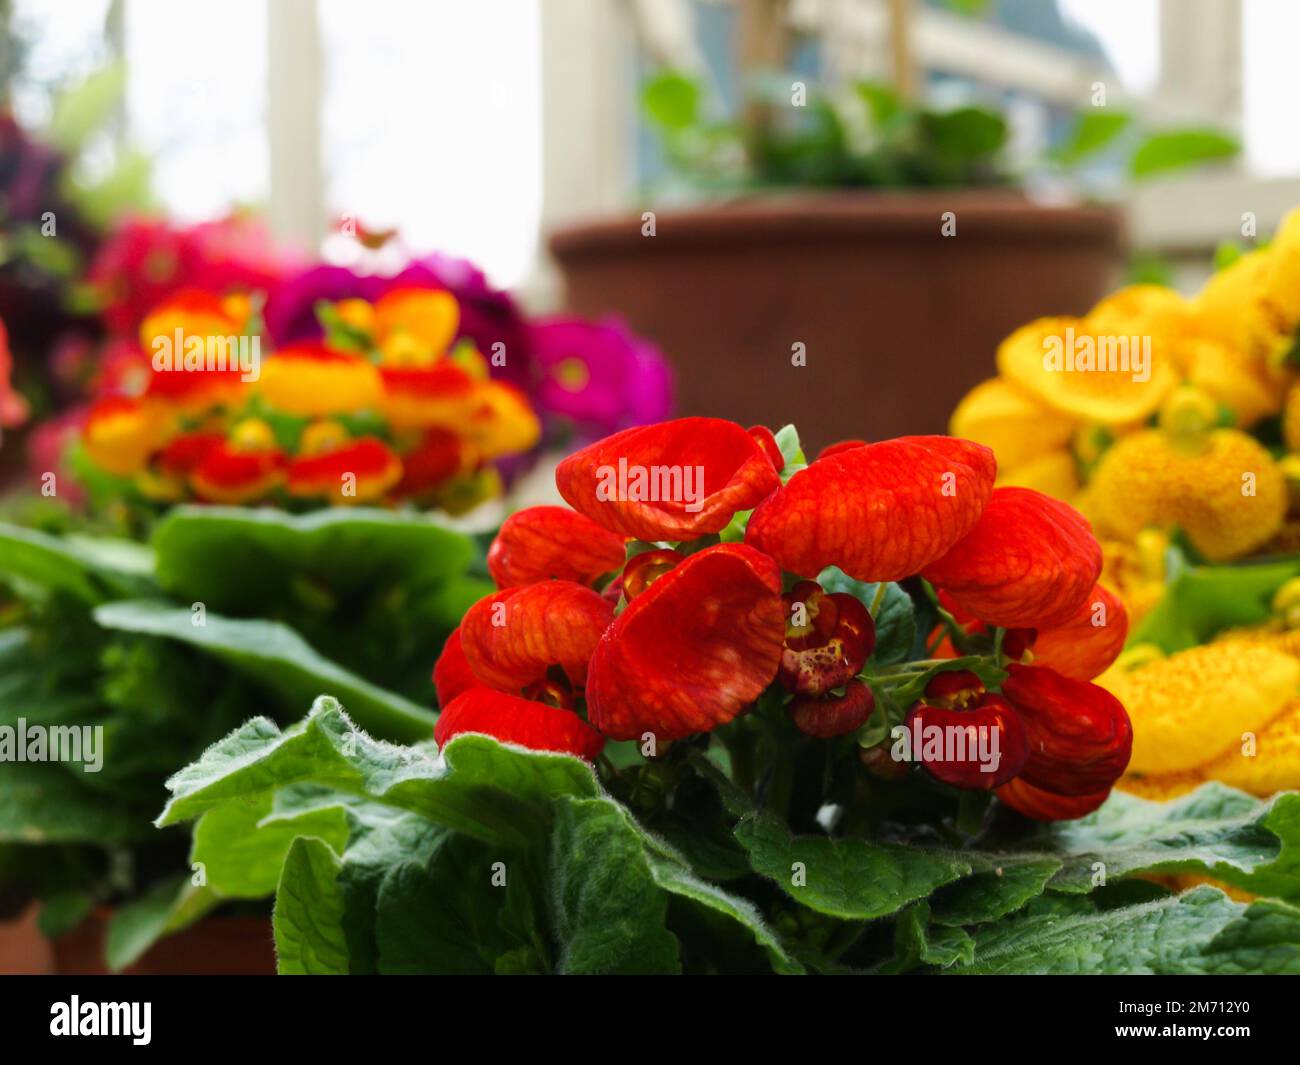 A closeup shot of blooming red calceolaria herbeohybrida flowers in a garden Stock Photo